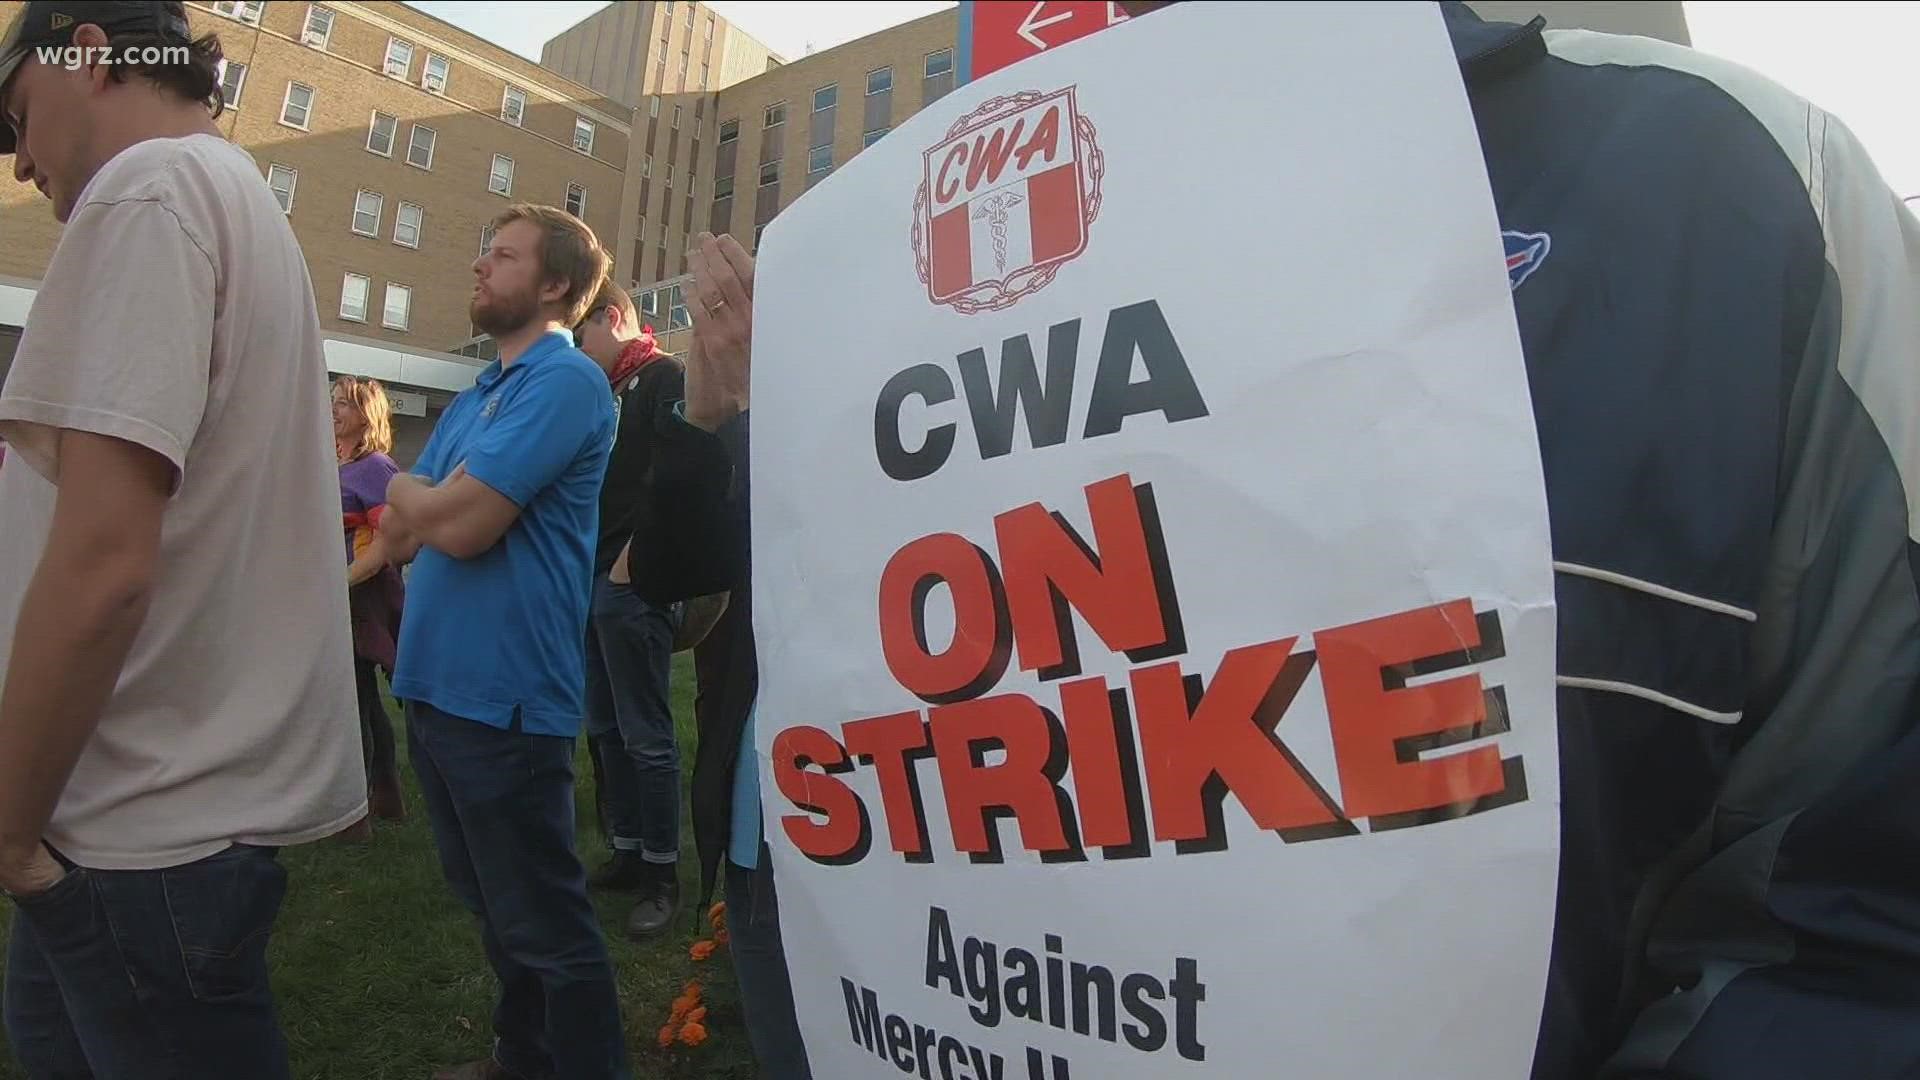 After 39 days, the CWA strike against Catholic Health is over. Union workers voted and ratified the tentative agreement.